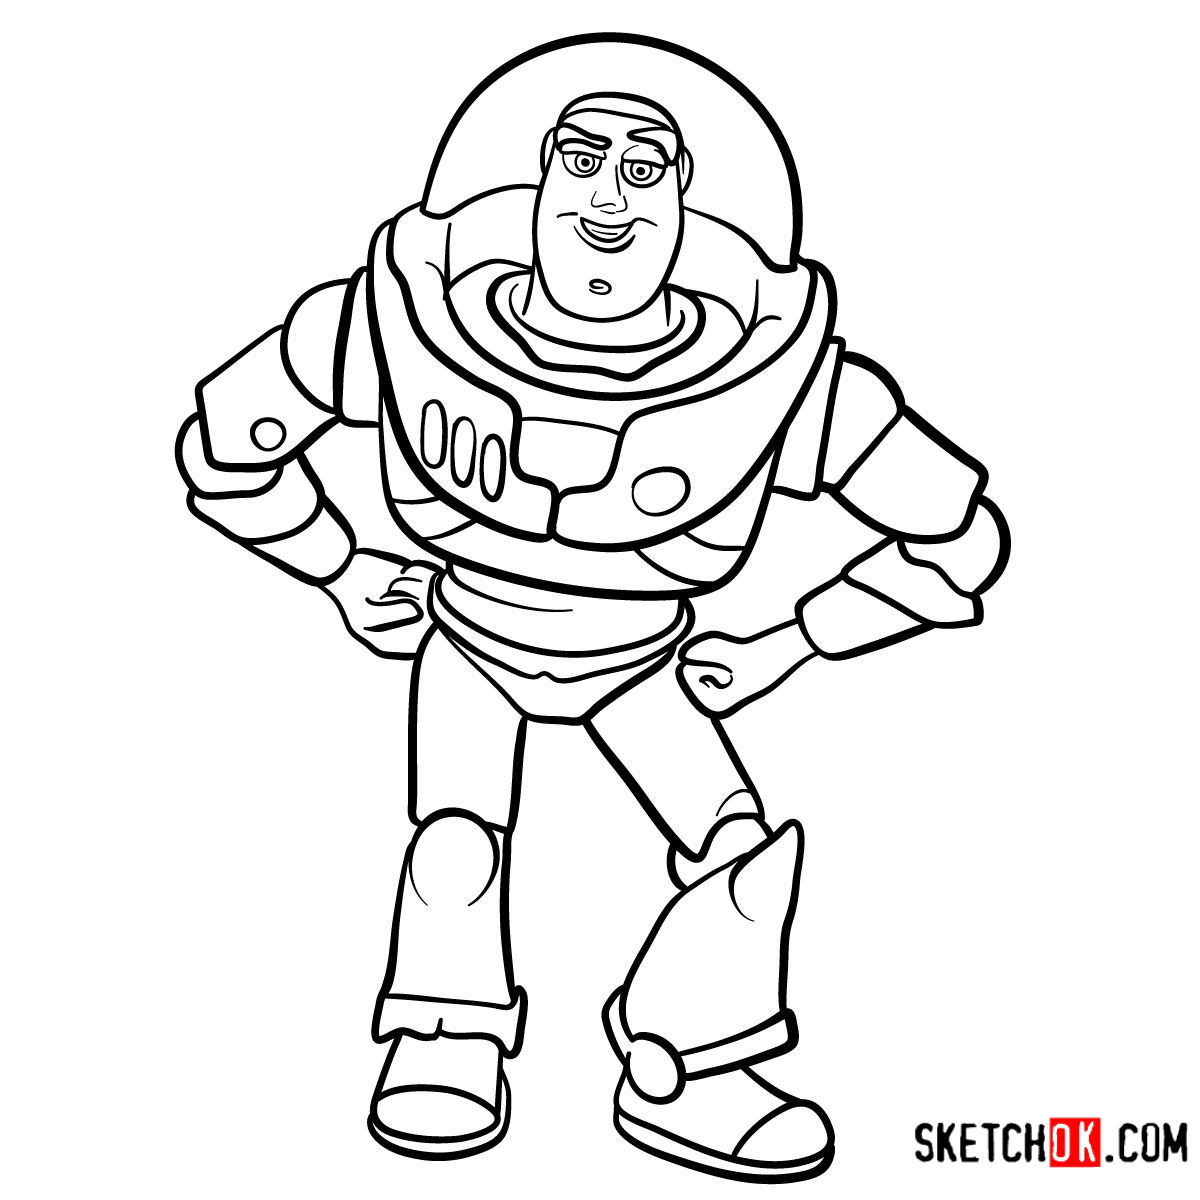 How to draw Buzz Lightyear | Toy Story - Step by step drawing tutorials